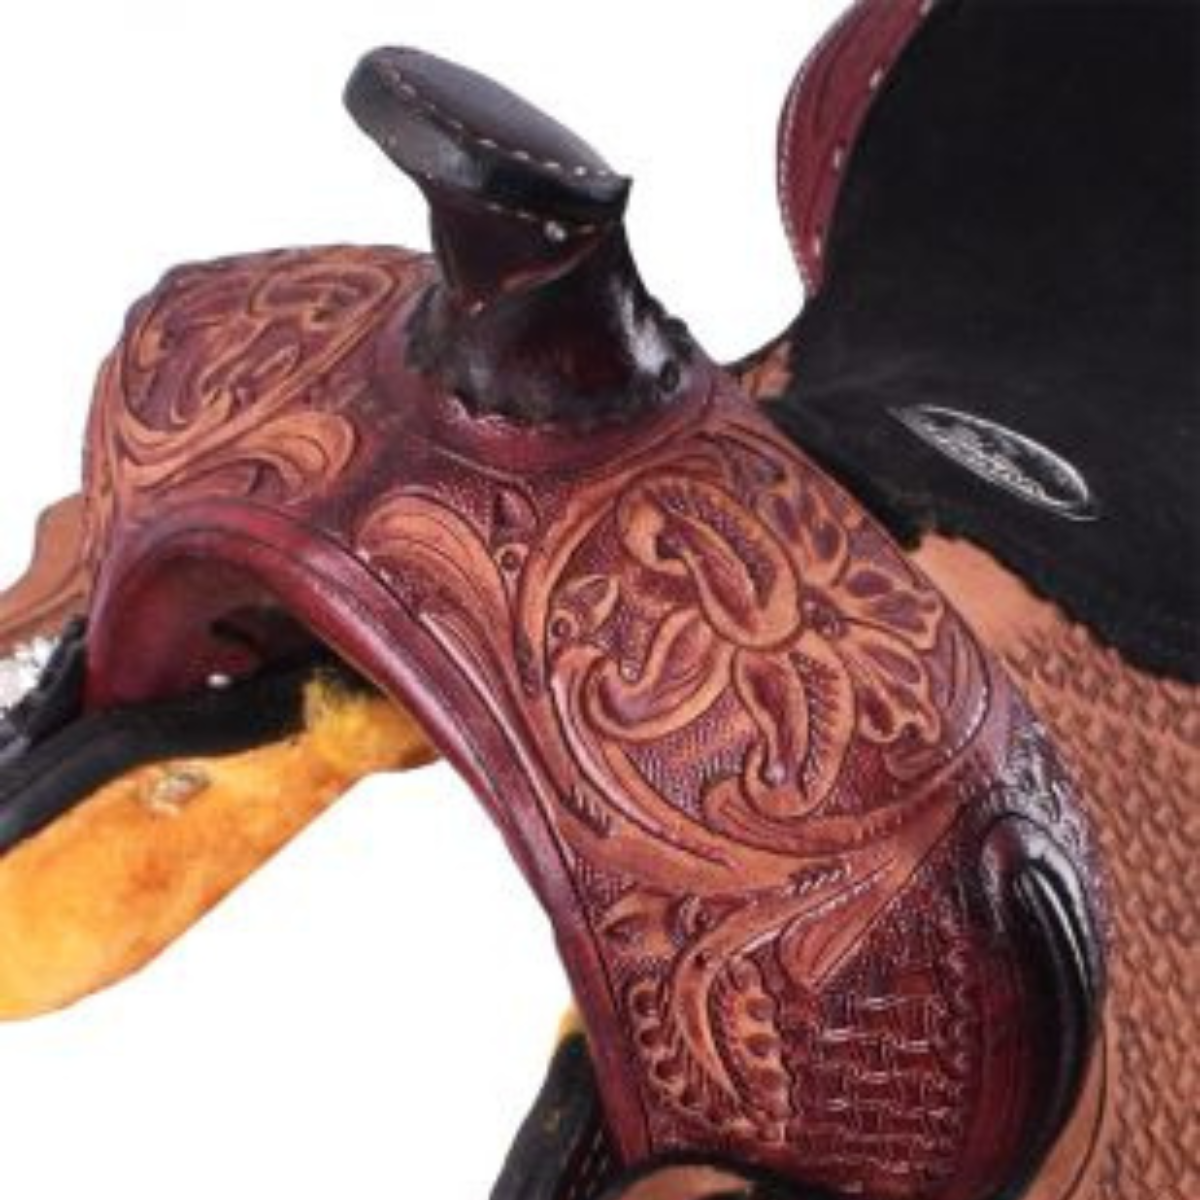 12" DOUBLE T YOUTH SADDLE WITH FLORAL TOOLING - Double T Saddles